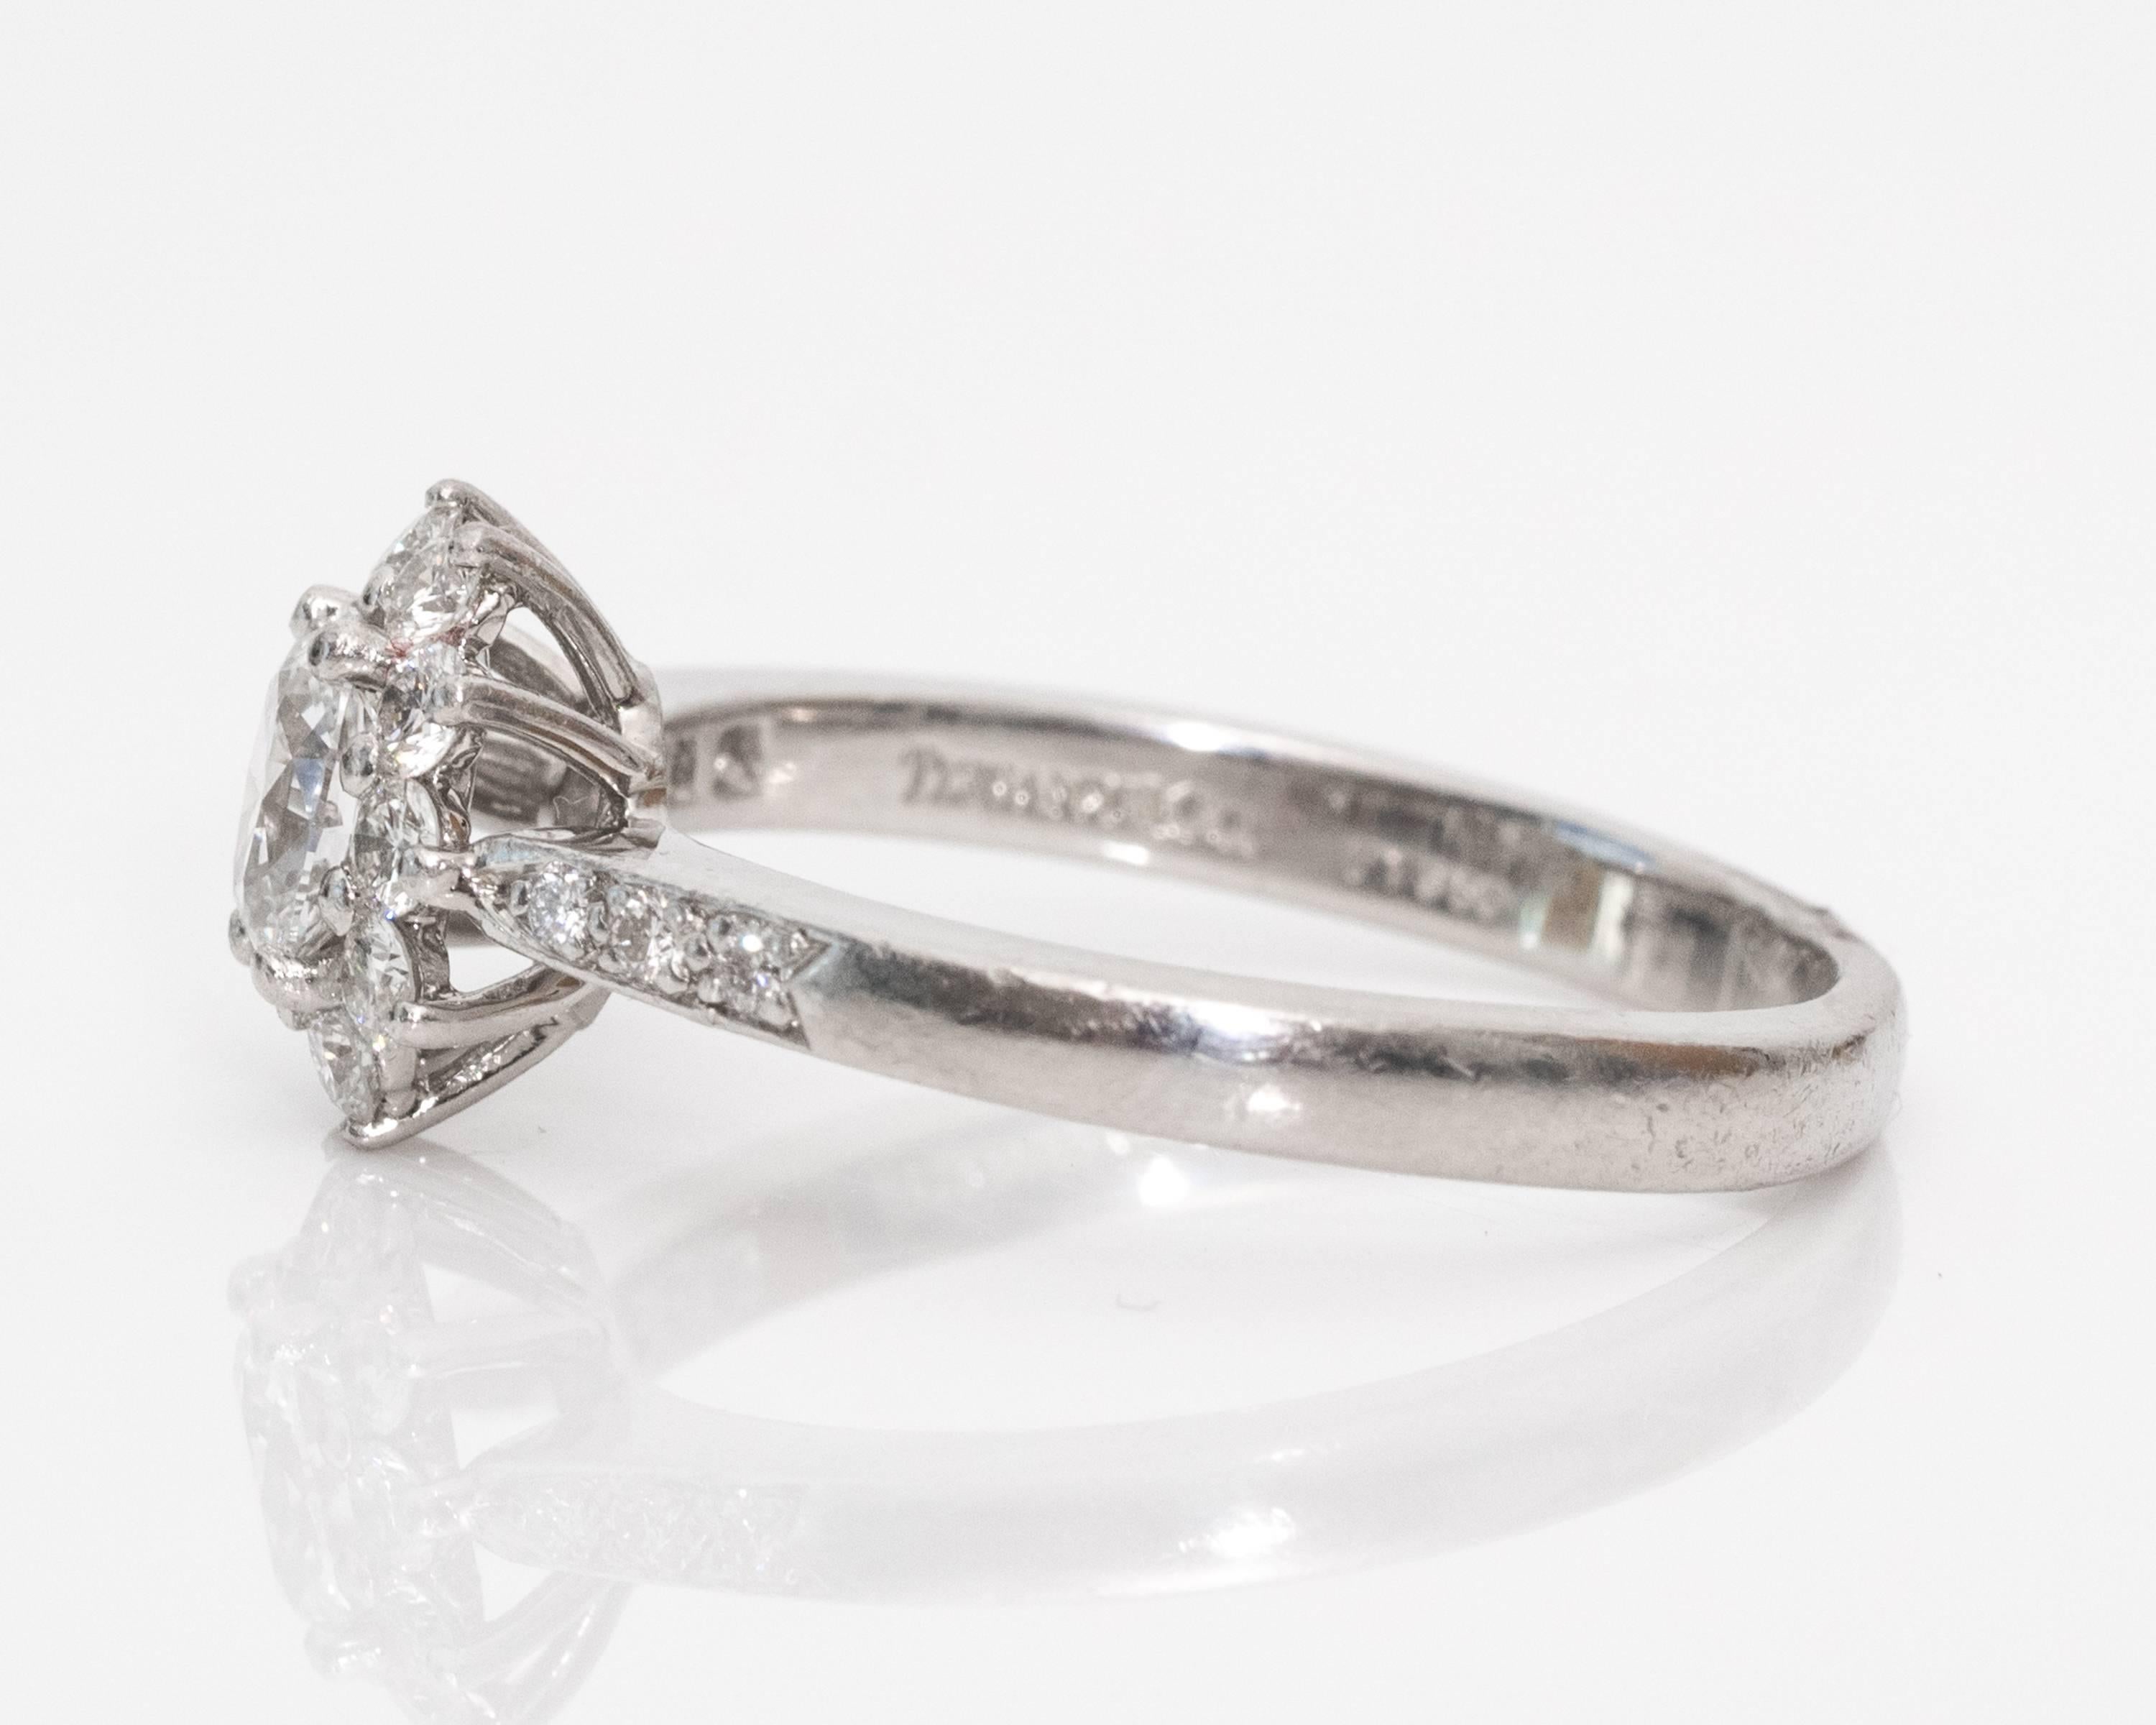 Tiffany & Co Engagement Ring Crafted in Platinum

This stunning engagement ring sparkles every which way with 17 diamonds total. The center stone is an oval shaped diamond with E color and VVS clarity. Few diamonds on the market can compare to this